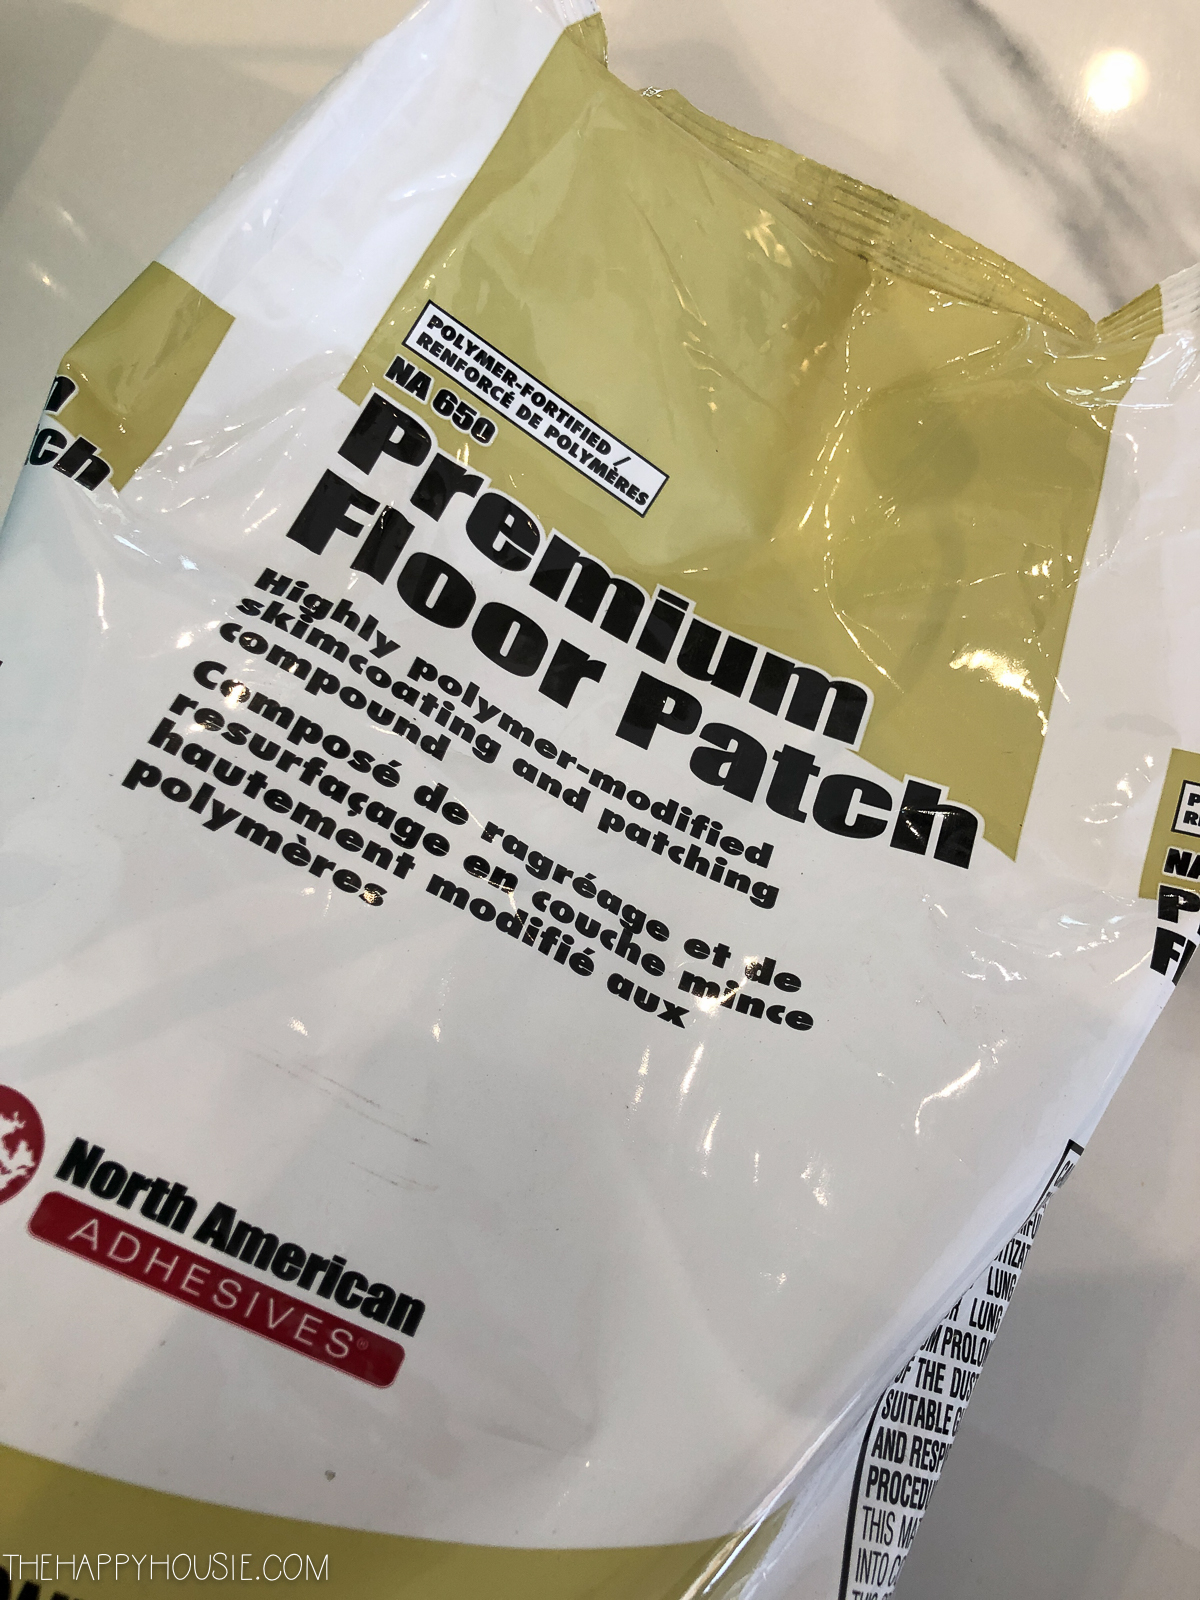 Floor patch material in a bag.